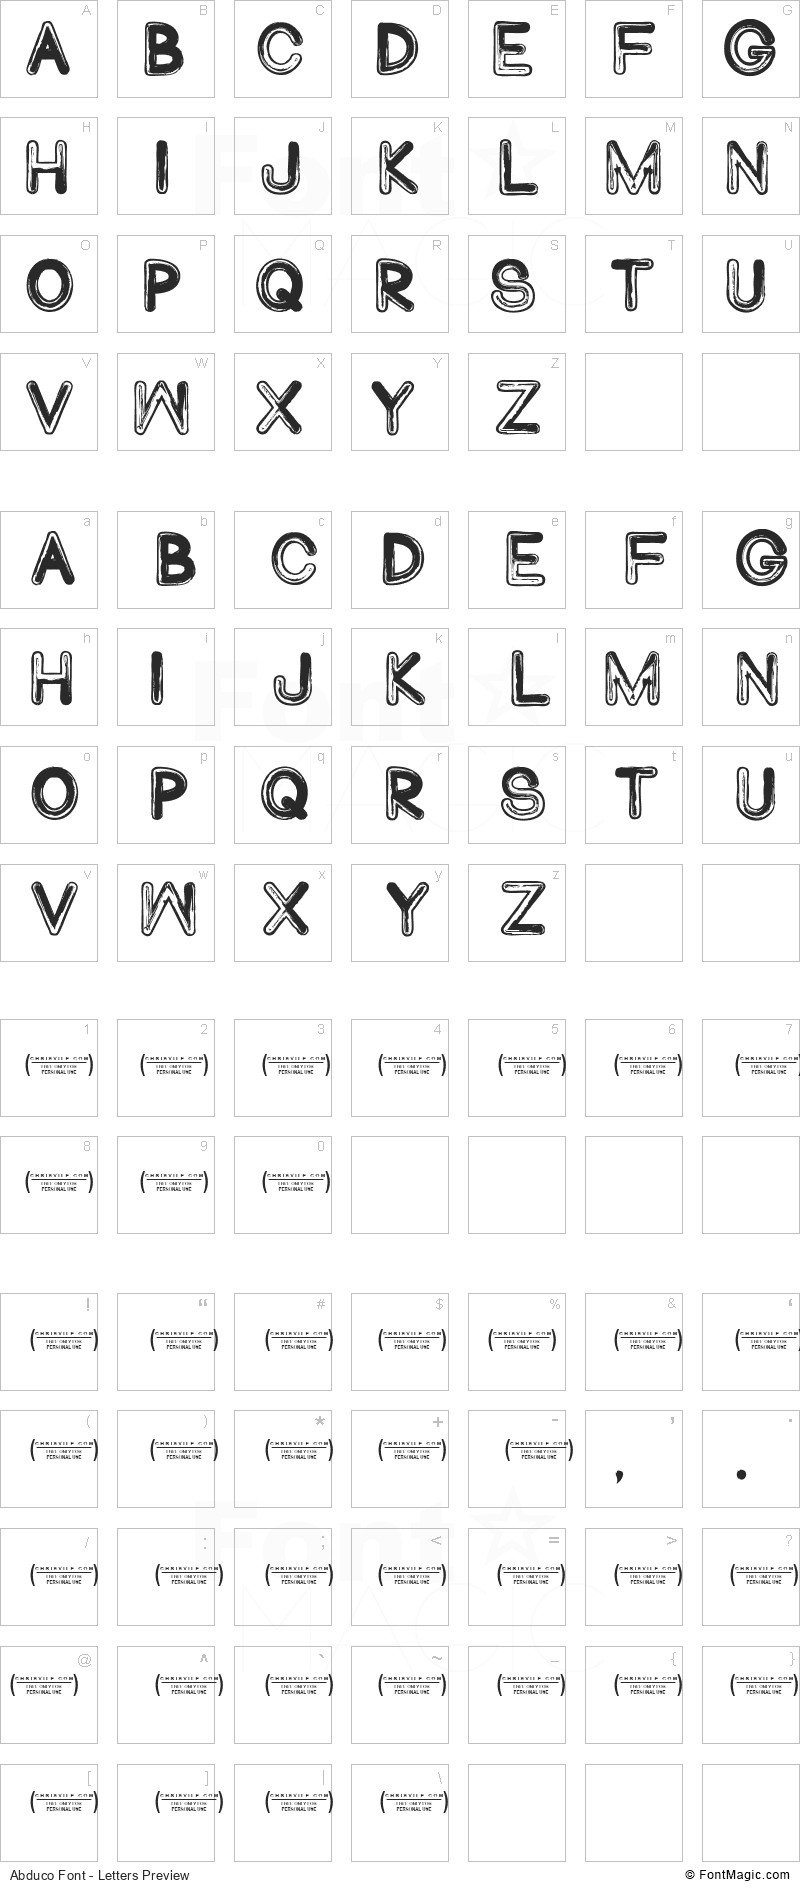 Abduco Font - All Latters Preview Chart